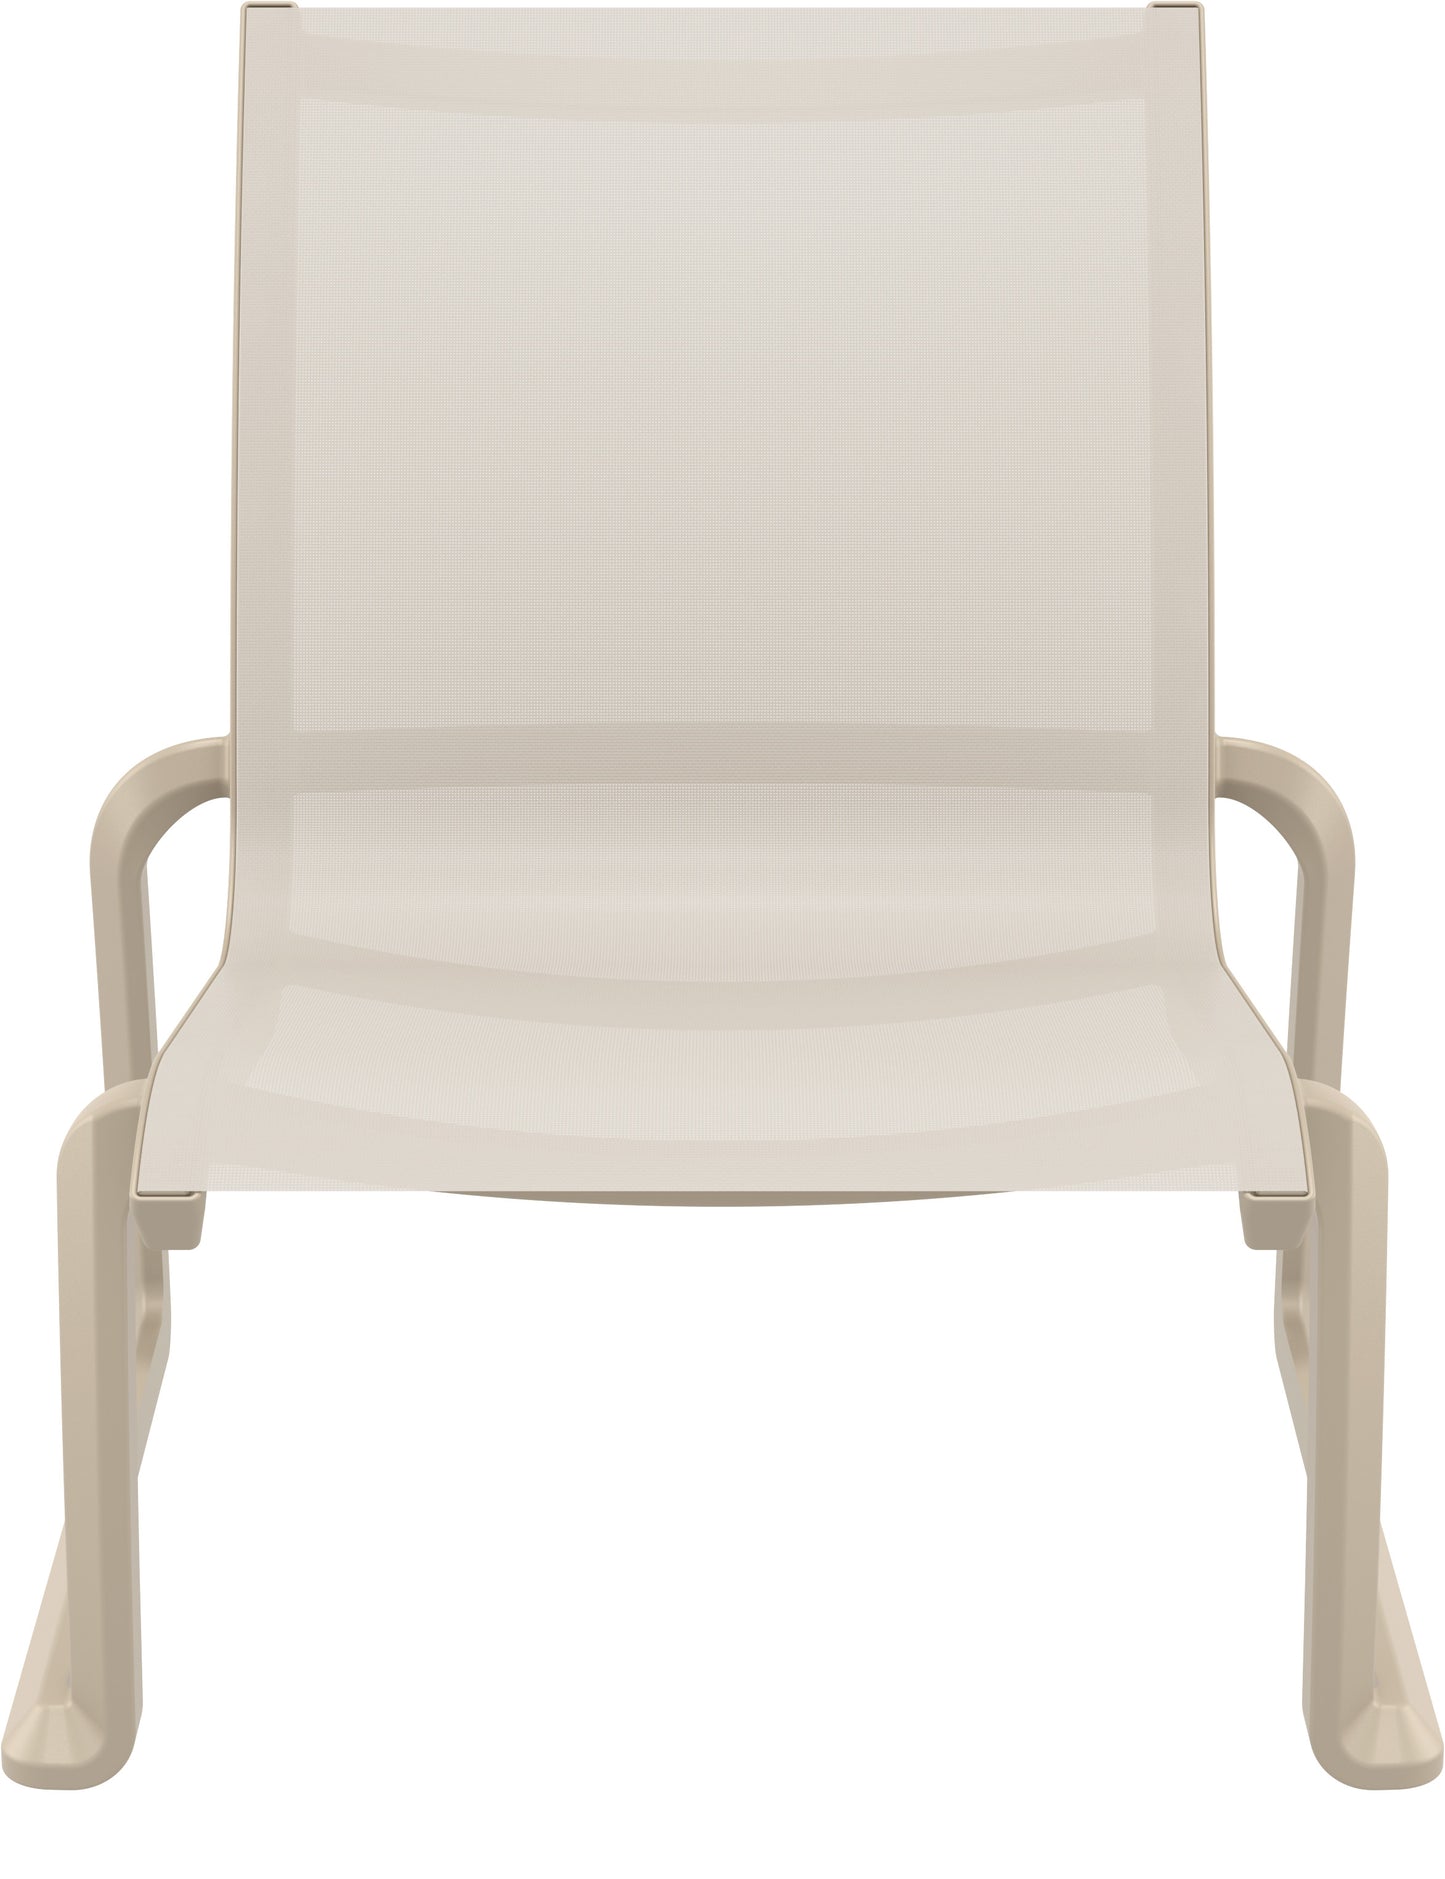 Coolum Outdoor Lounge Chair - Latte